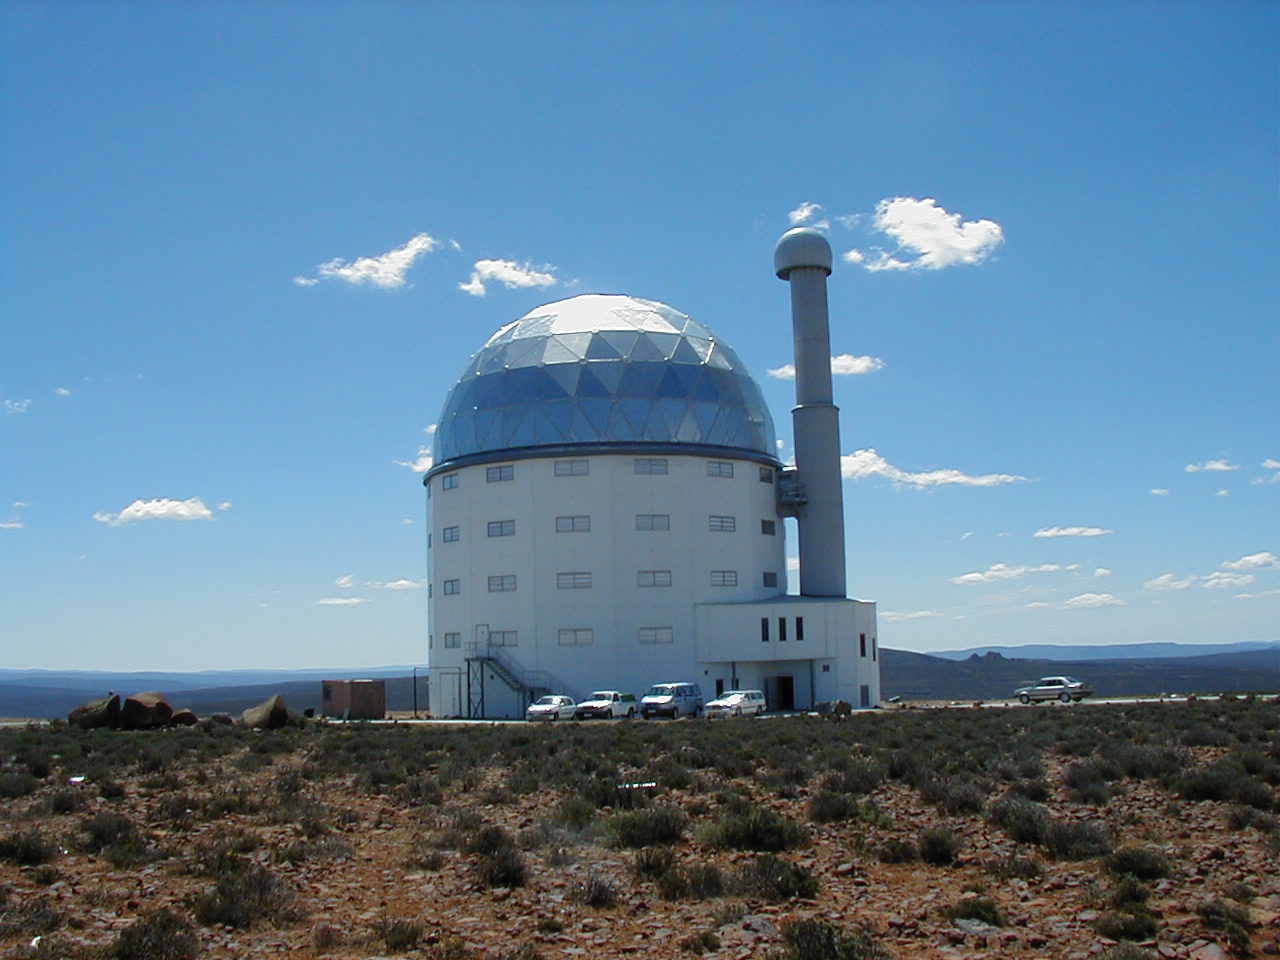 Telescopes and Other Astronomical Tools